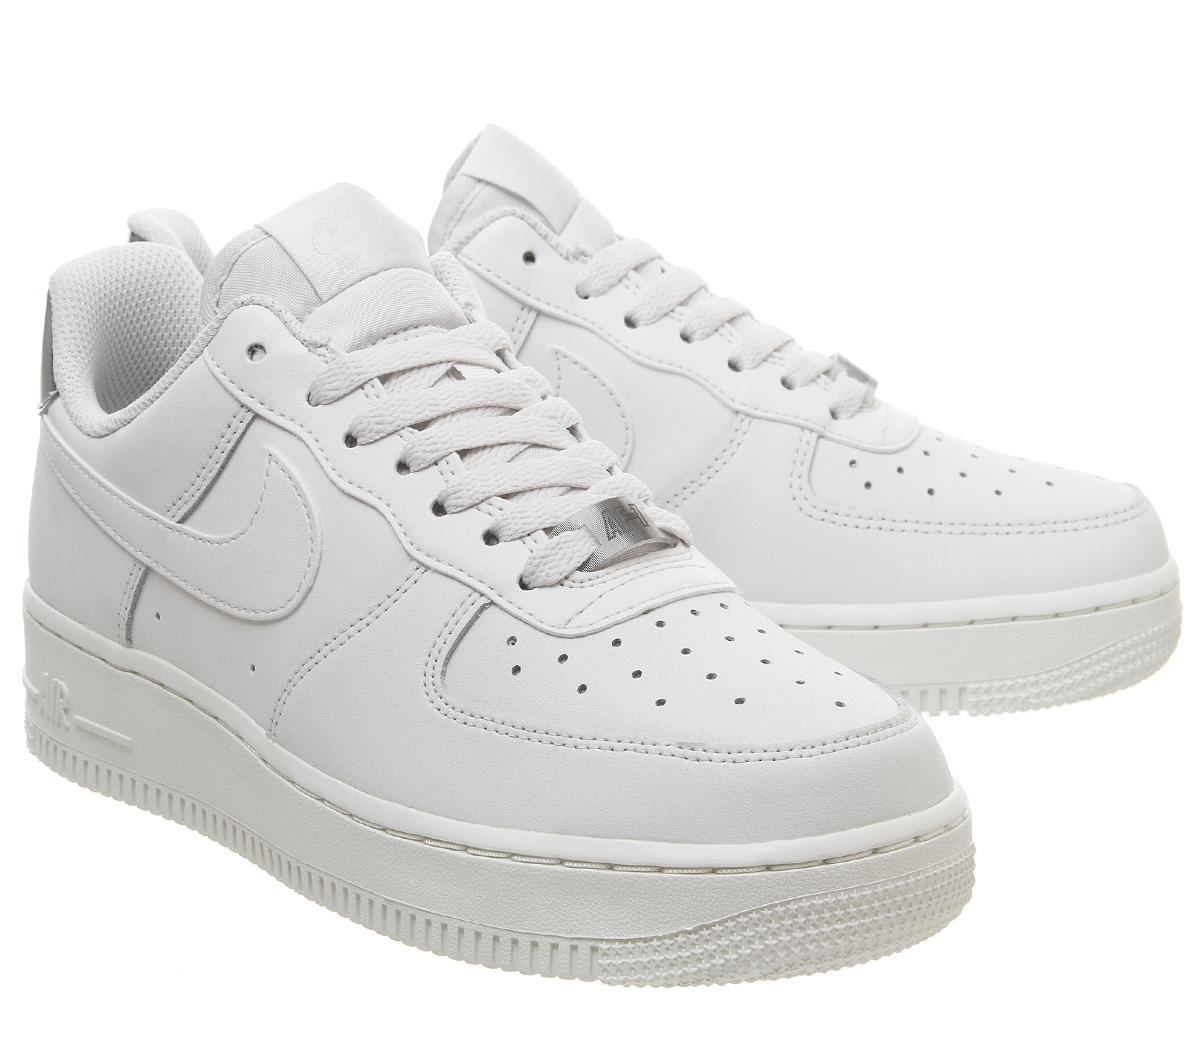 Nike Air Force 1 07 Trainers Platinum Tint Summit White - Hers trainers